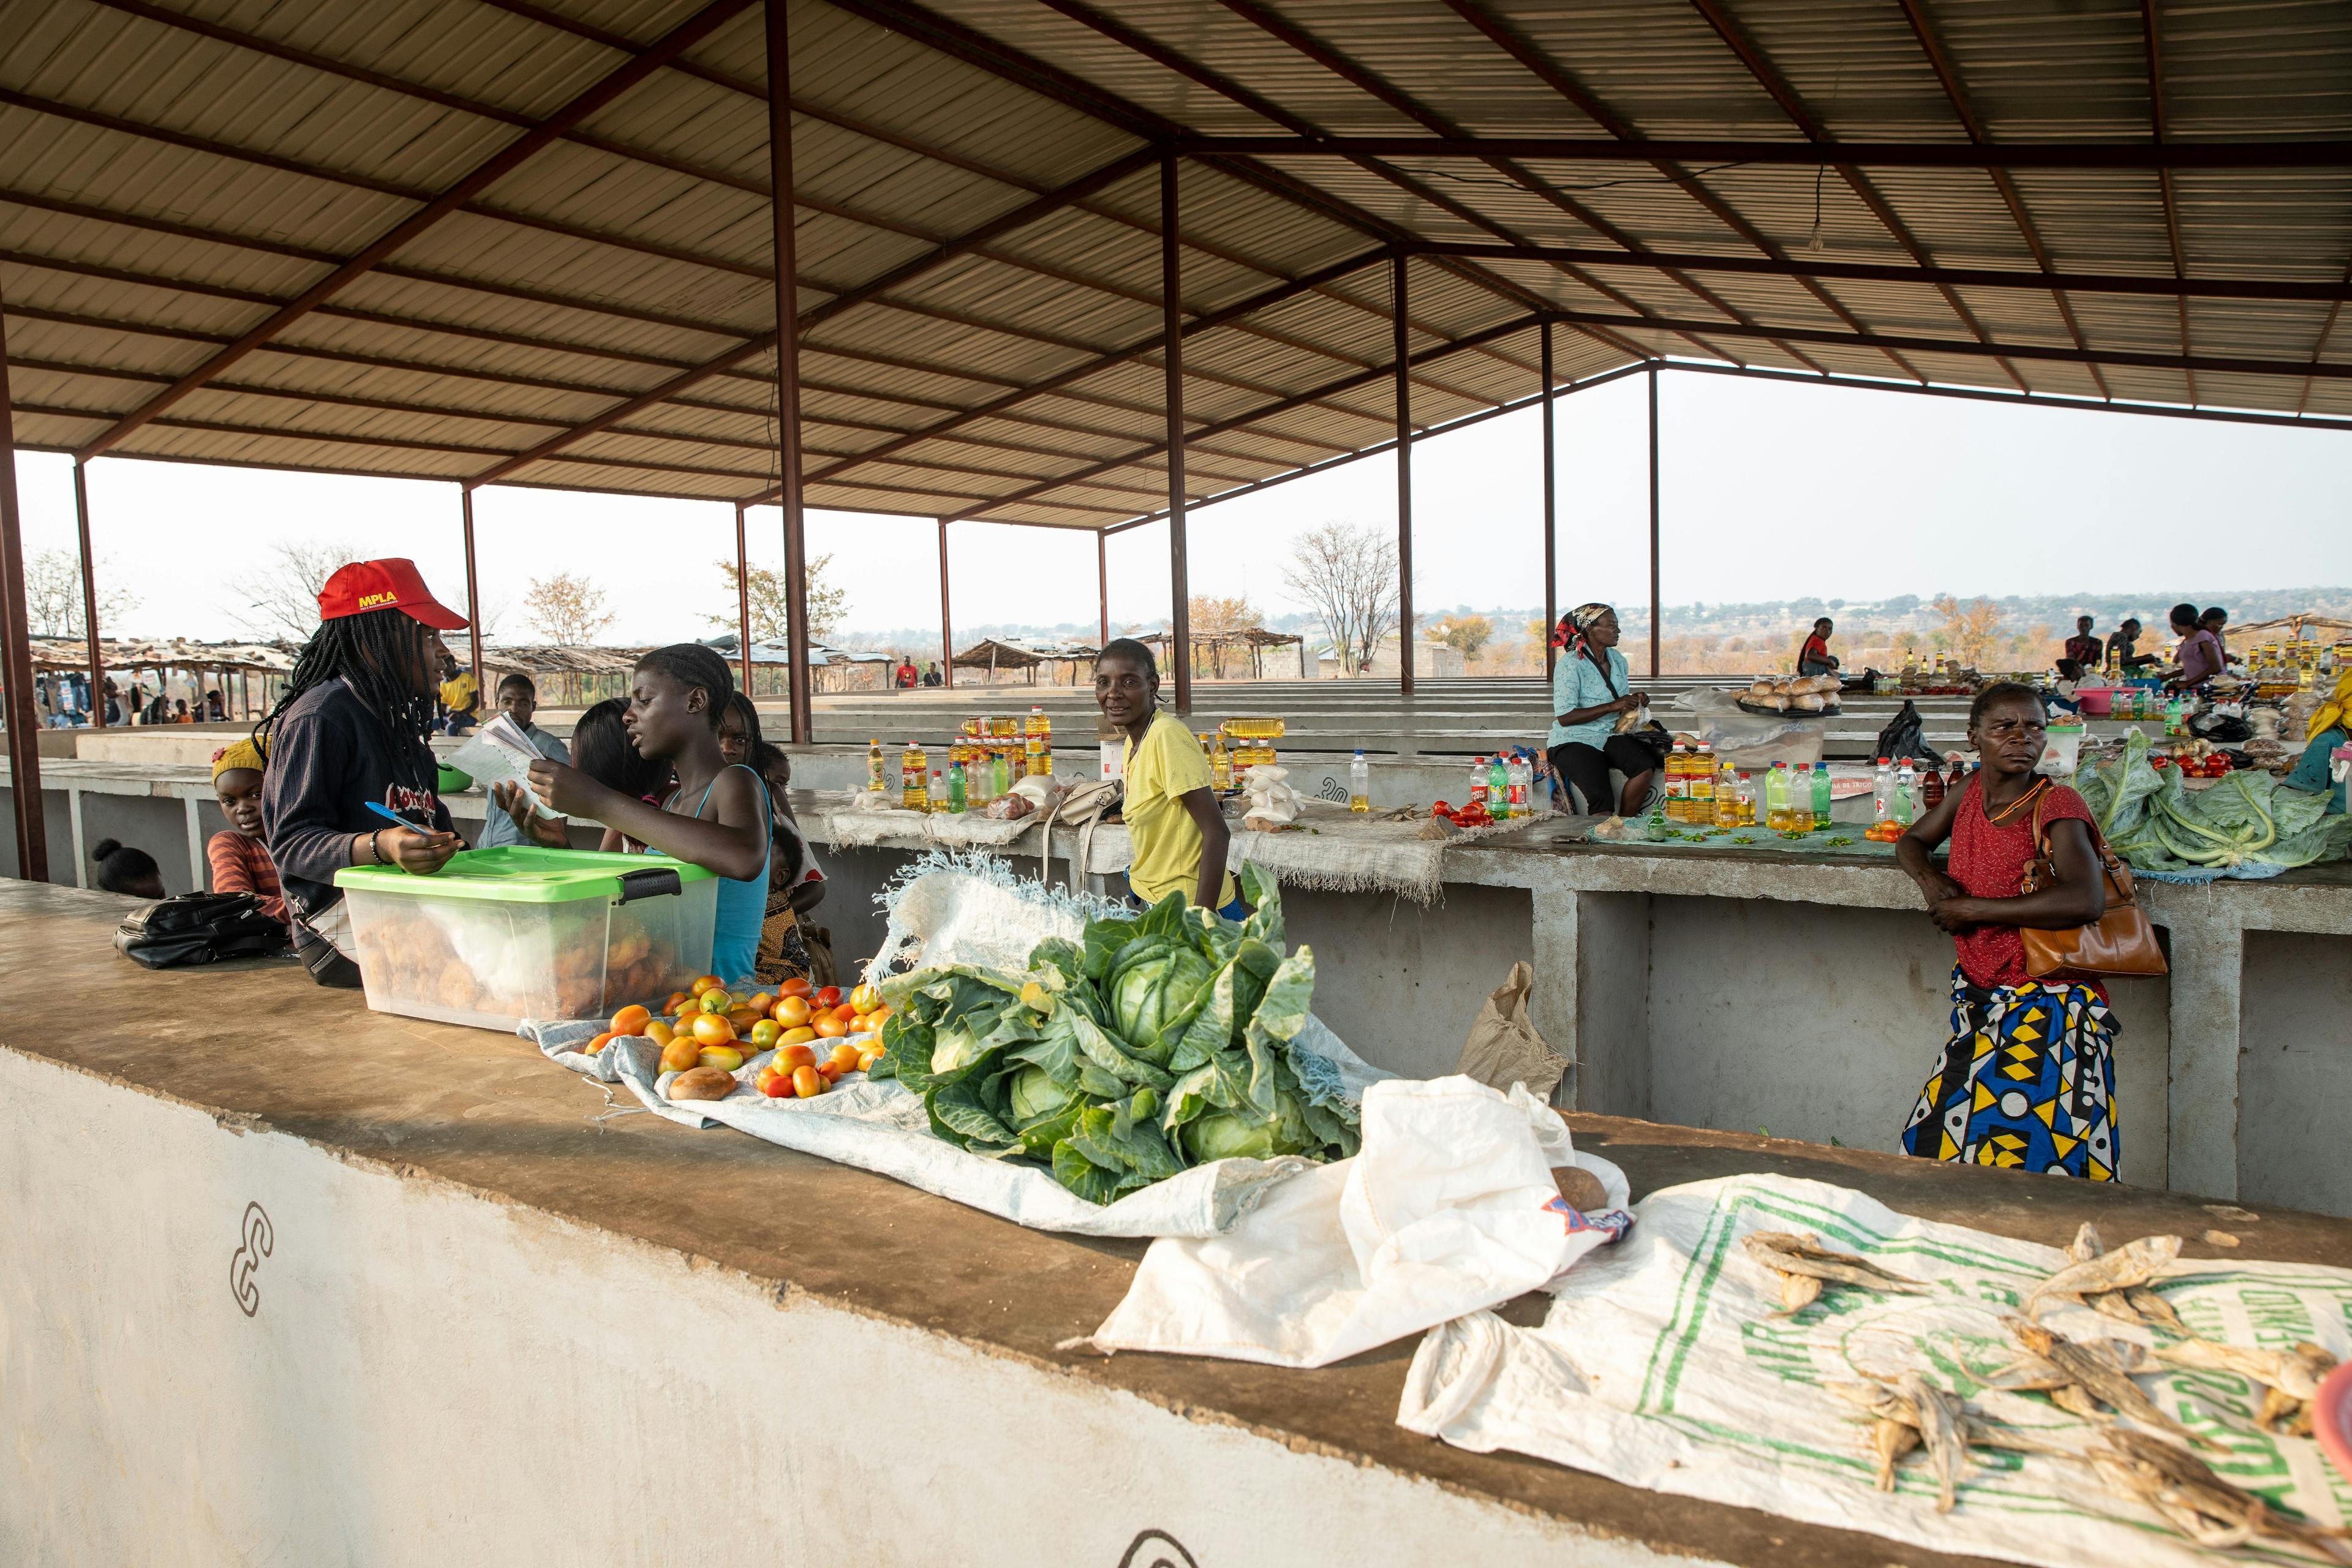 Traders at this open-air market sell fresh produce and pastries. Increasing crop yields due to improved climatic conditions in some areas are linked with an uptick in cross-border mobility, as people have the means to move over longer distances.